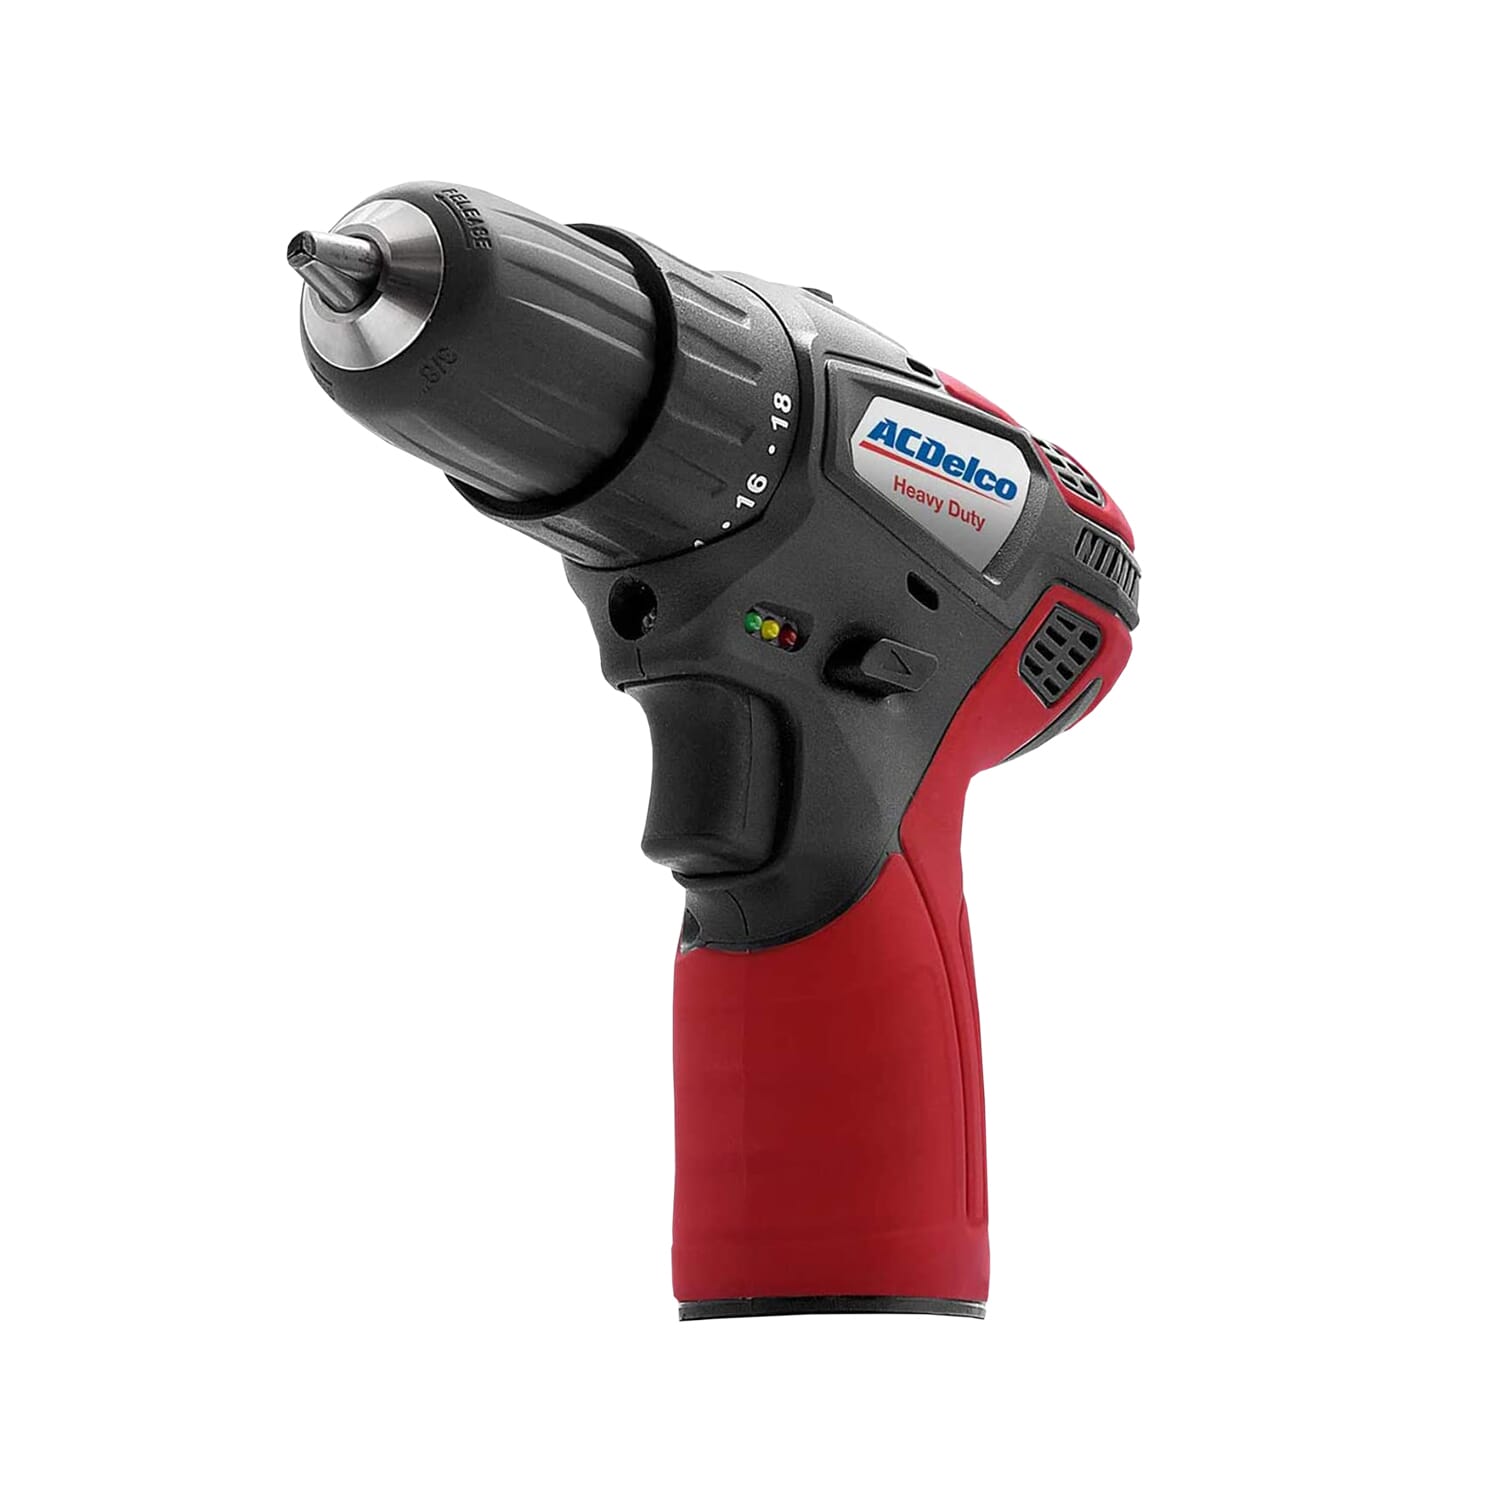 ARD12119T G12 Lithium-Ion 12V 3/8” 30Nm 2 Speed Compact Drill / Driver Cordless Electric Power Tool - Tool Only